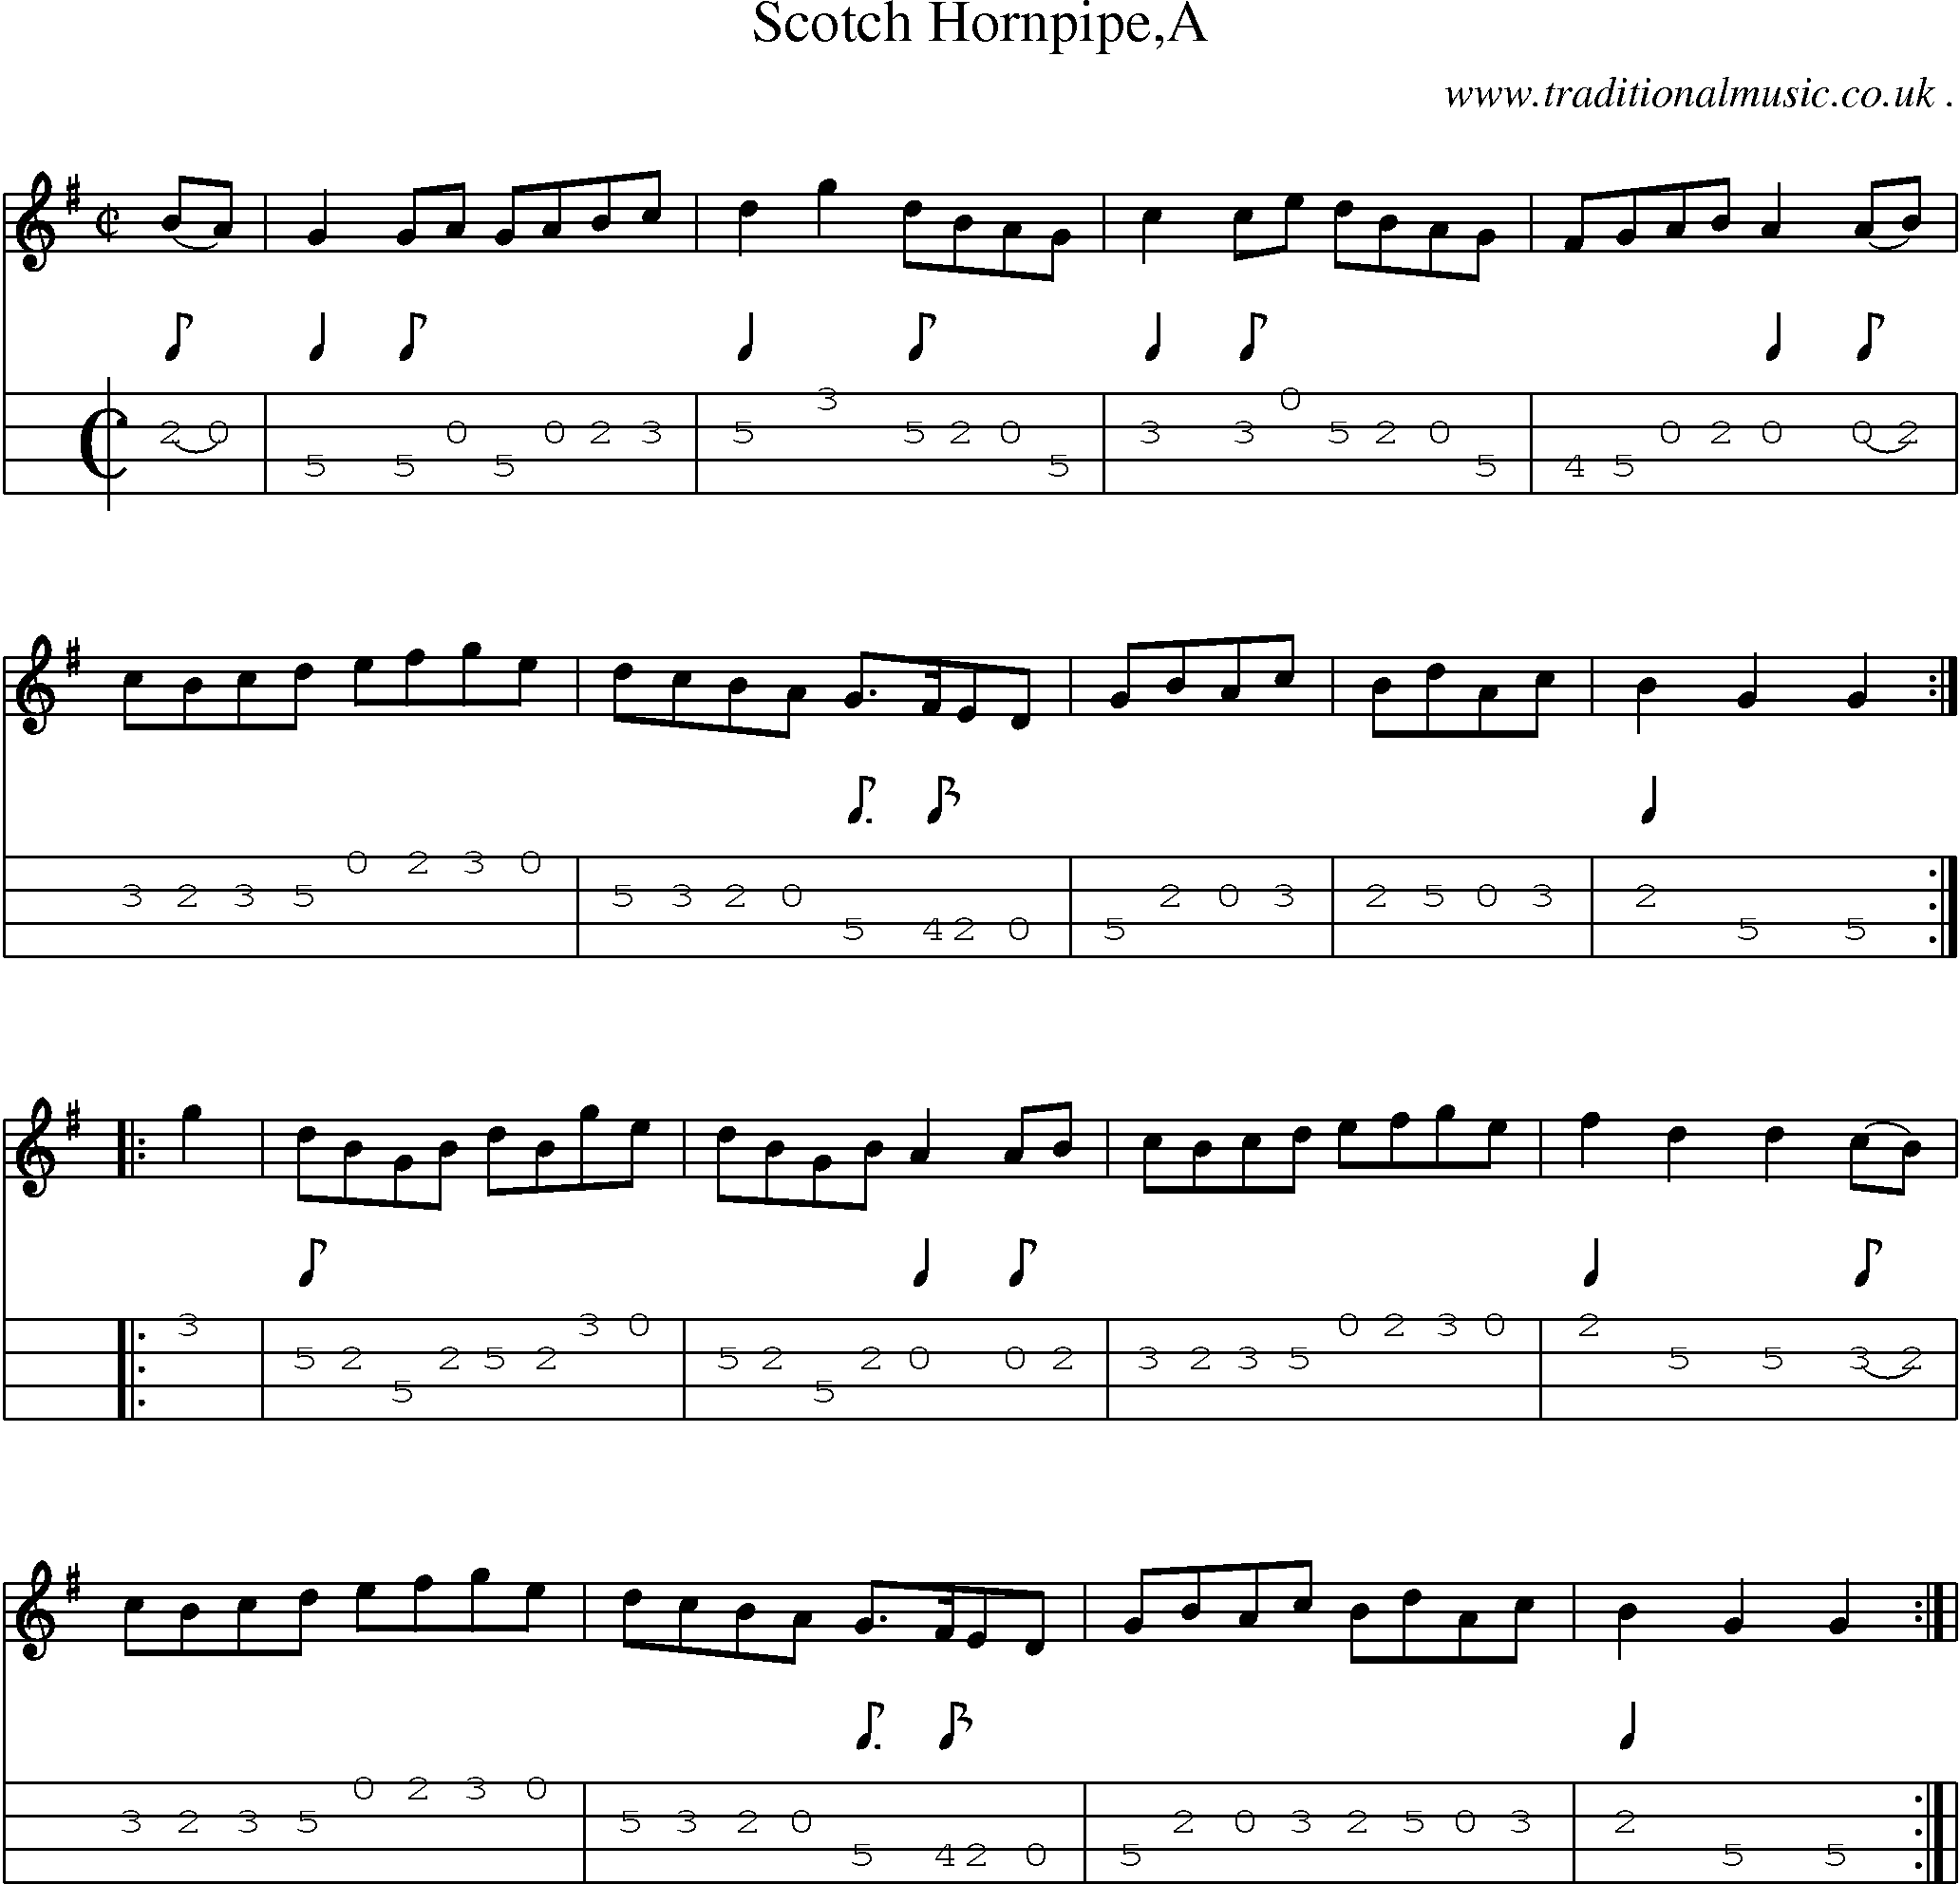 Sheet-Music and Mandolin Tabs for Scotch Hornpipea